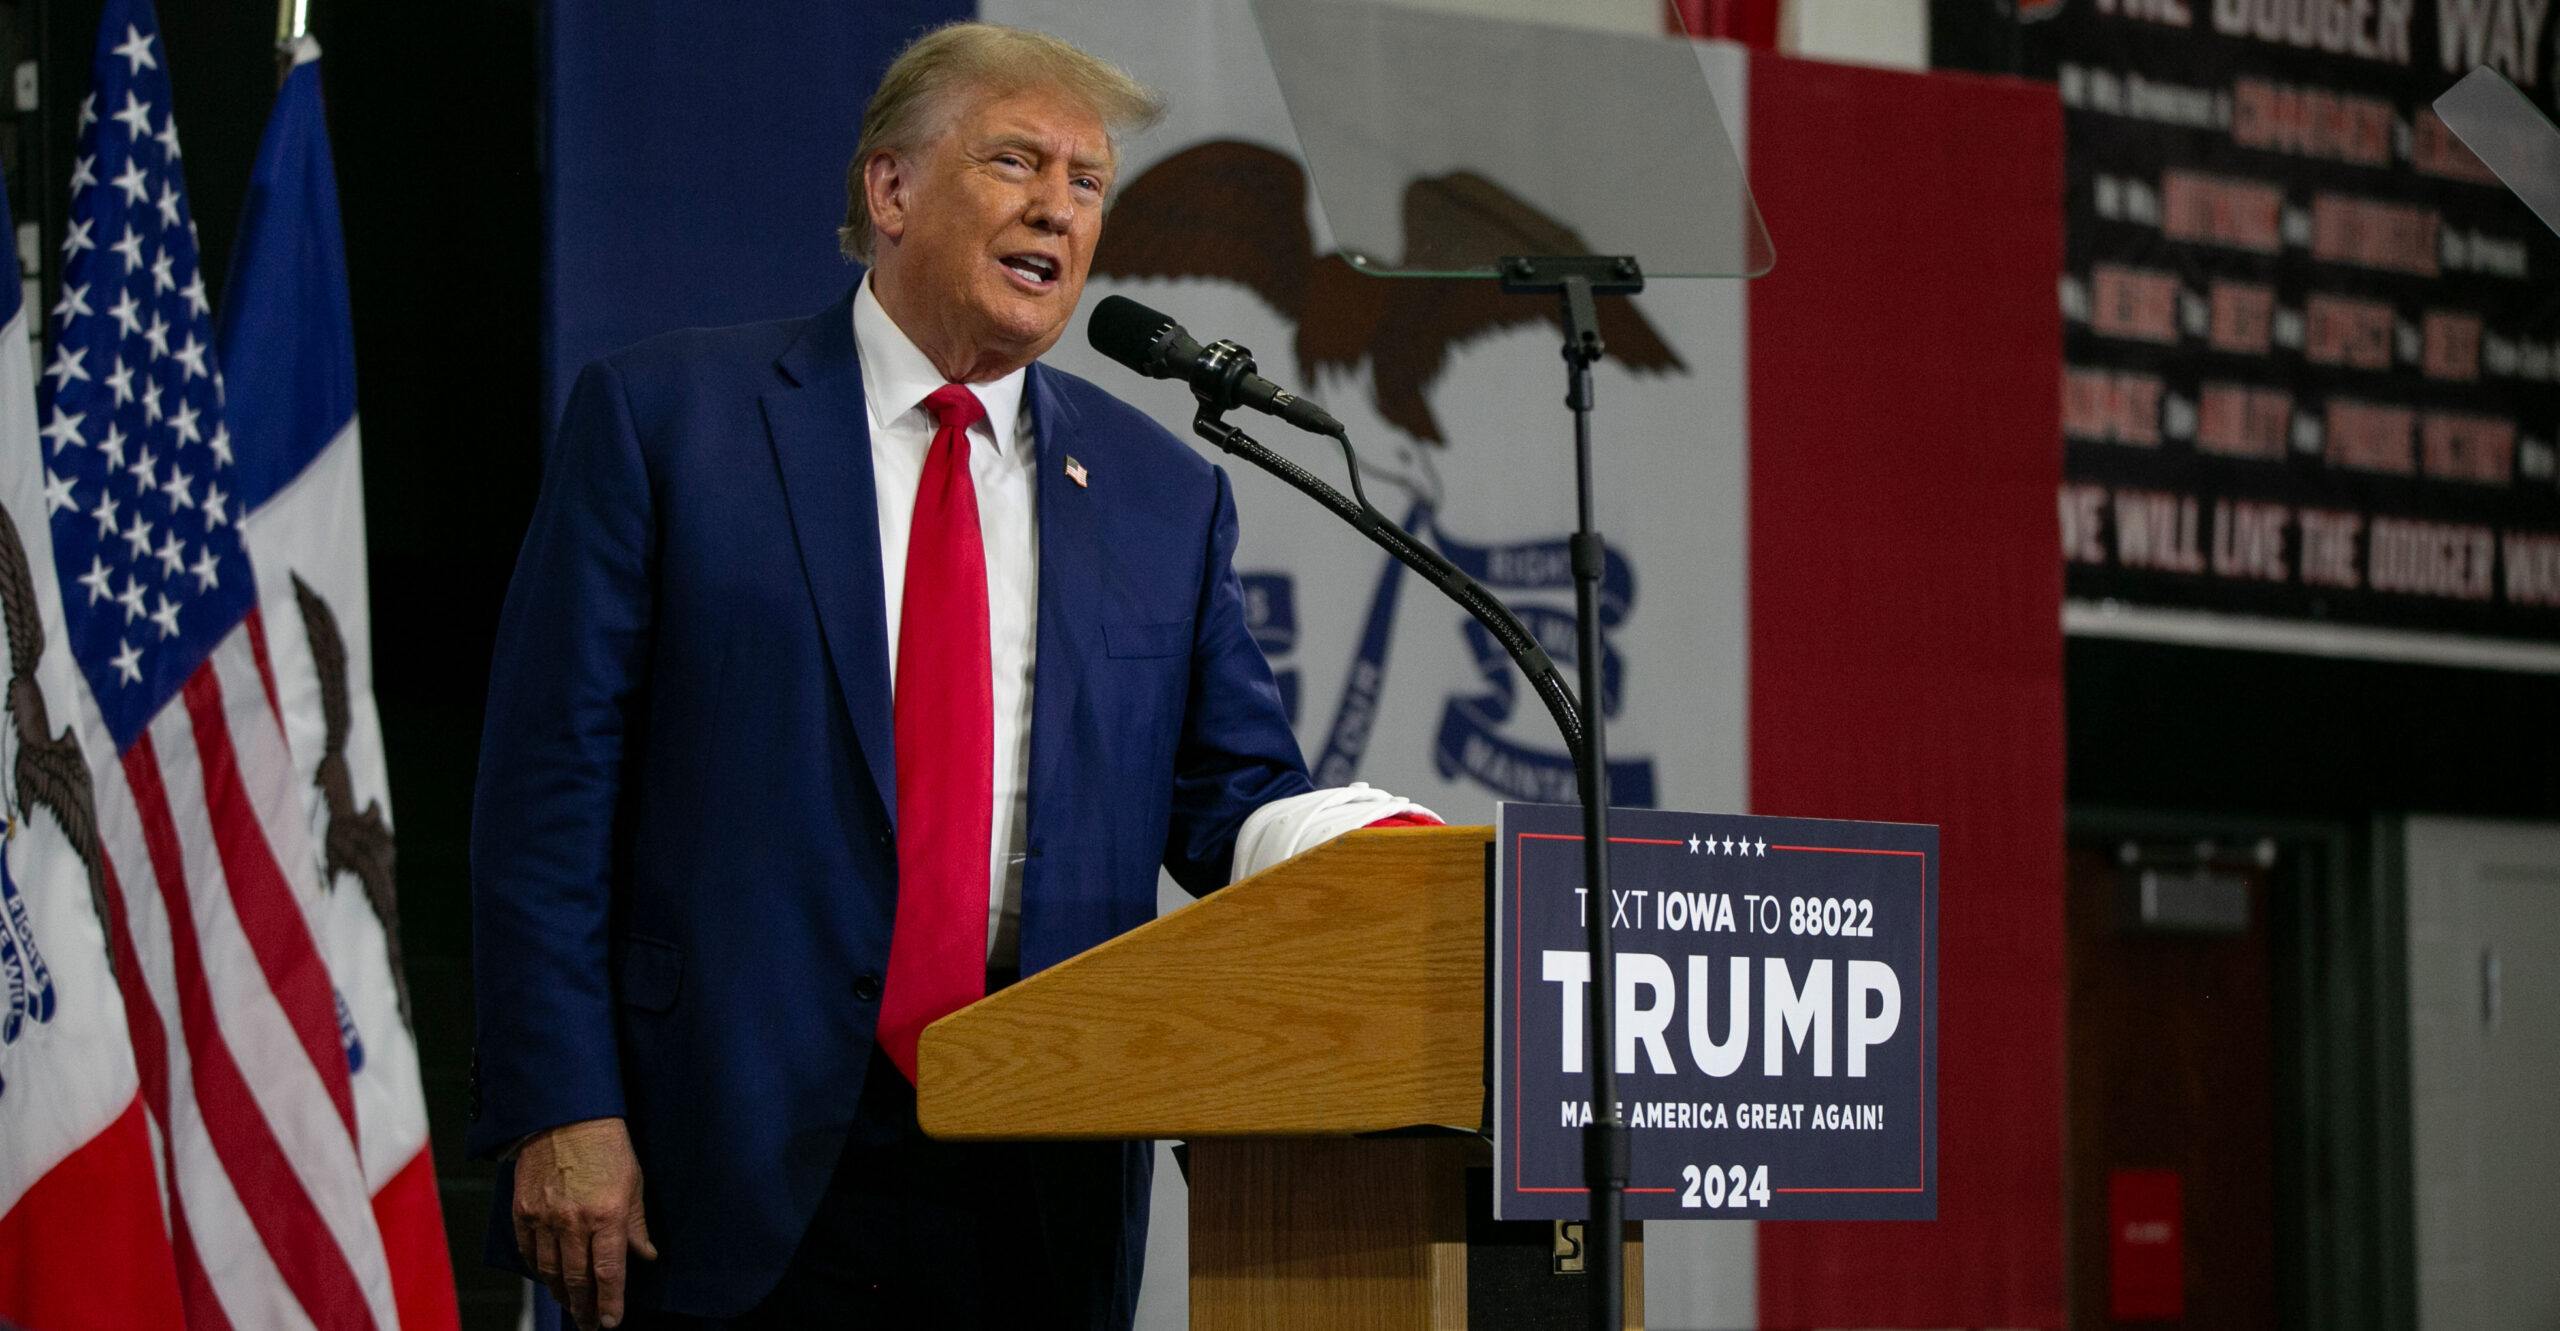 'Outrageous Attempt at Disenfranchising': 6 Takeaways From Trump's Iowa Rally